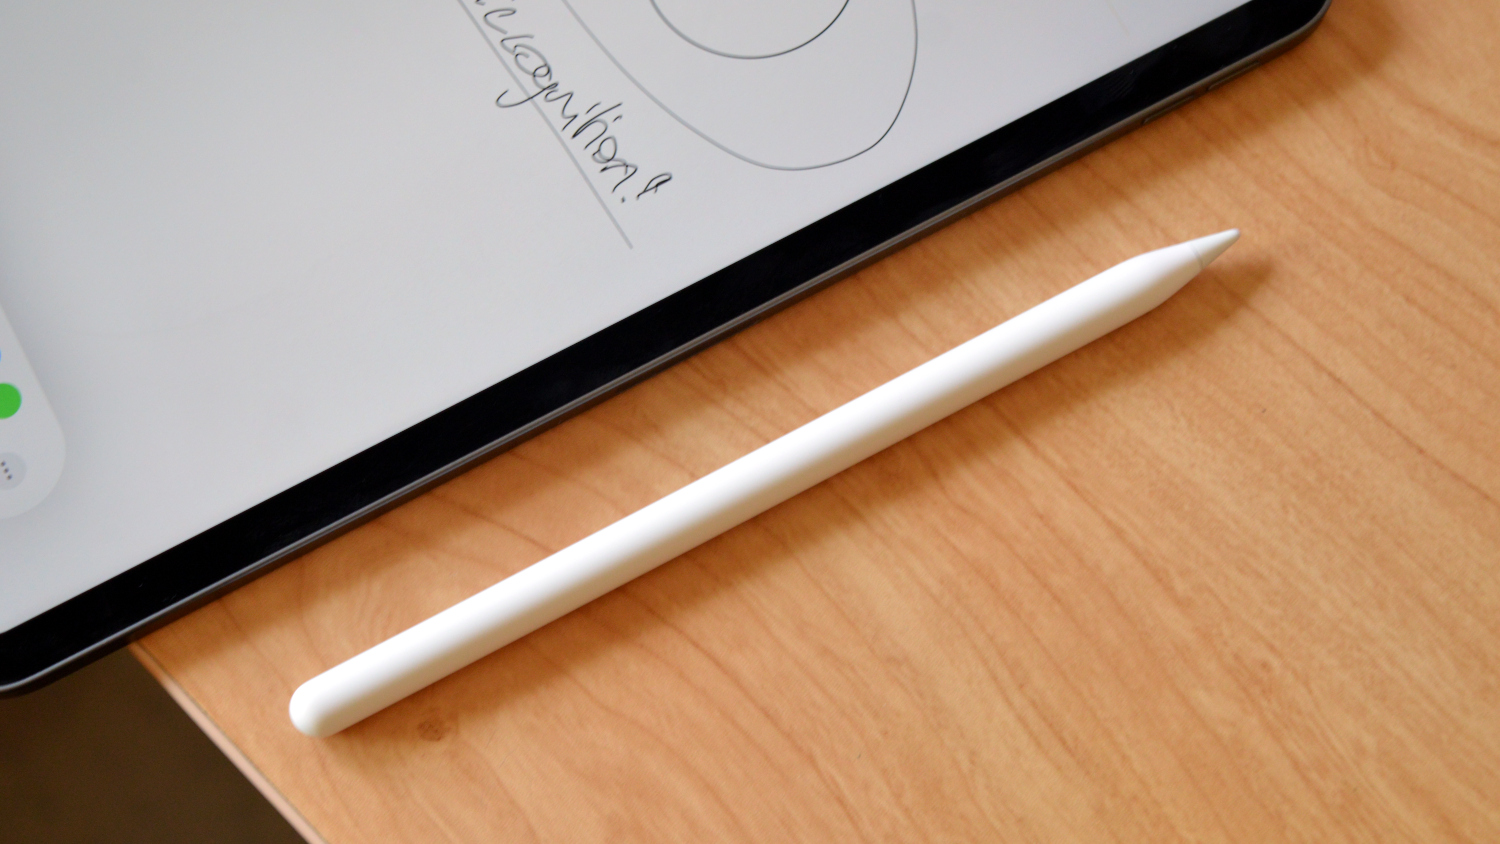 10 smart styluses that work like Apple Pencil - Reviewed